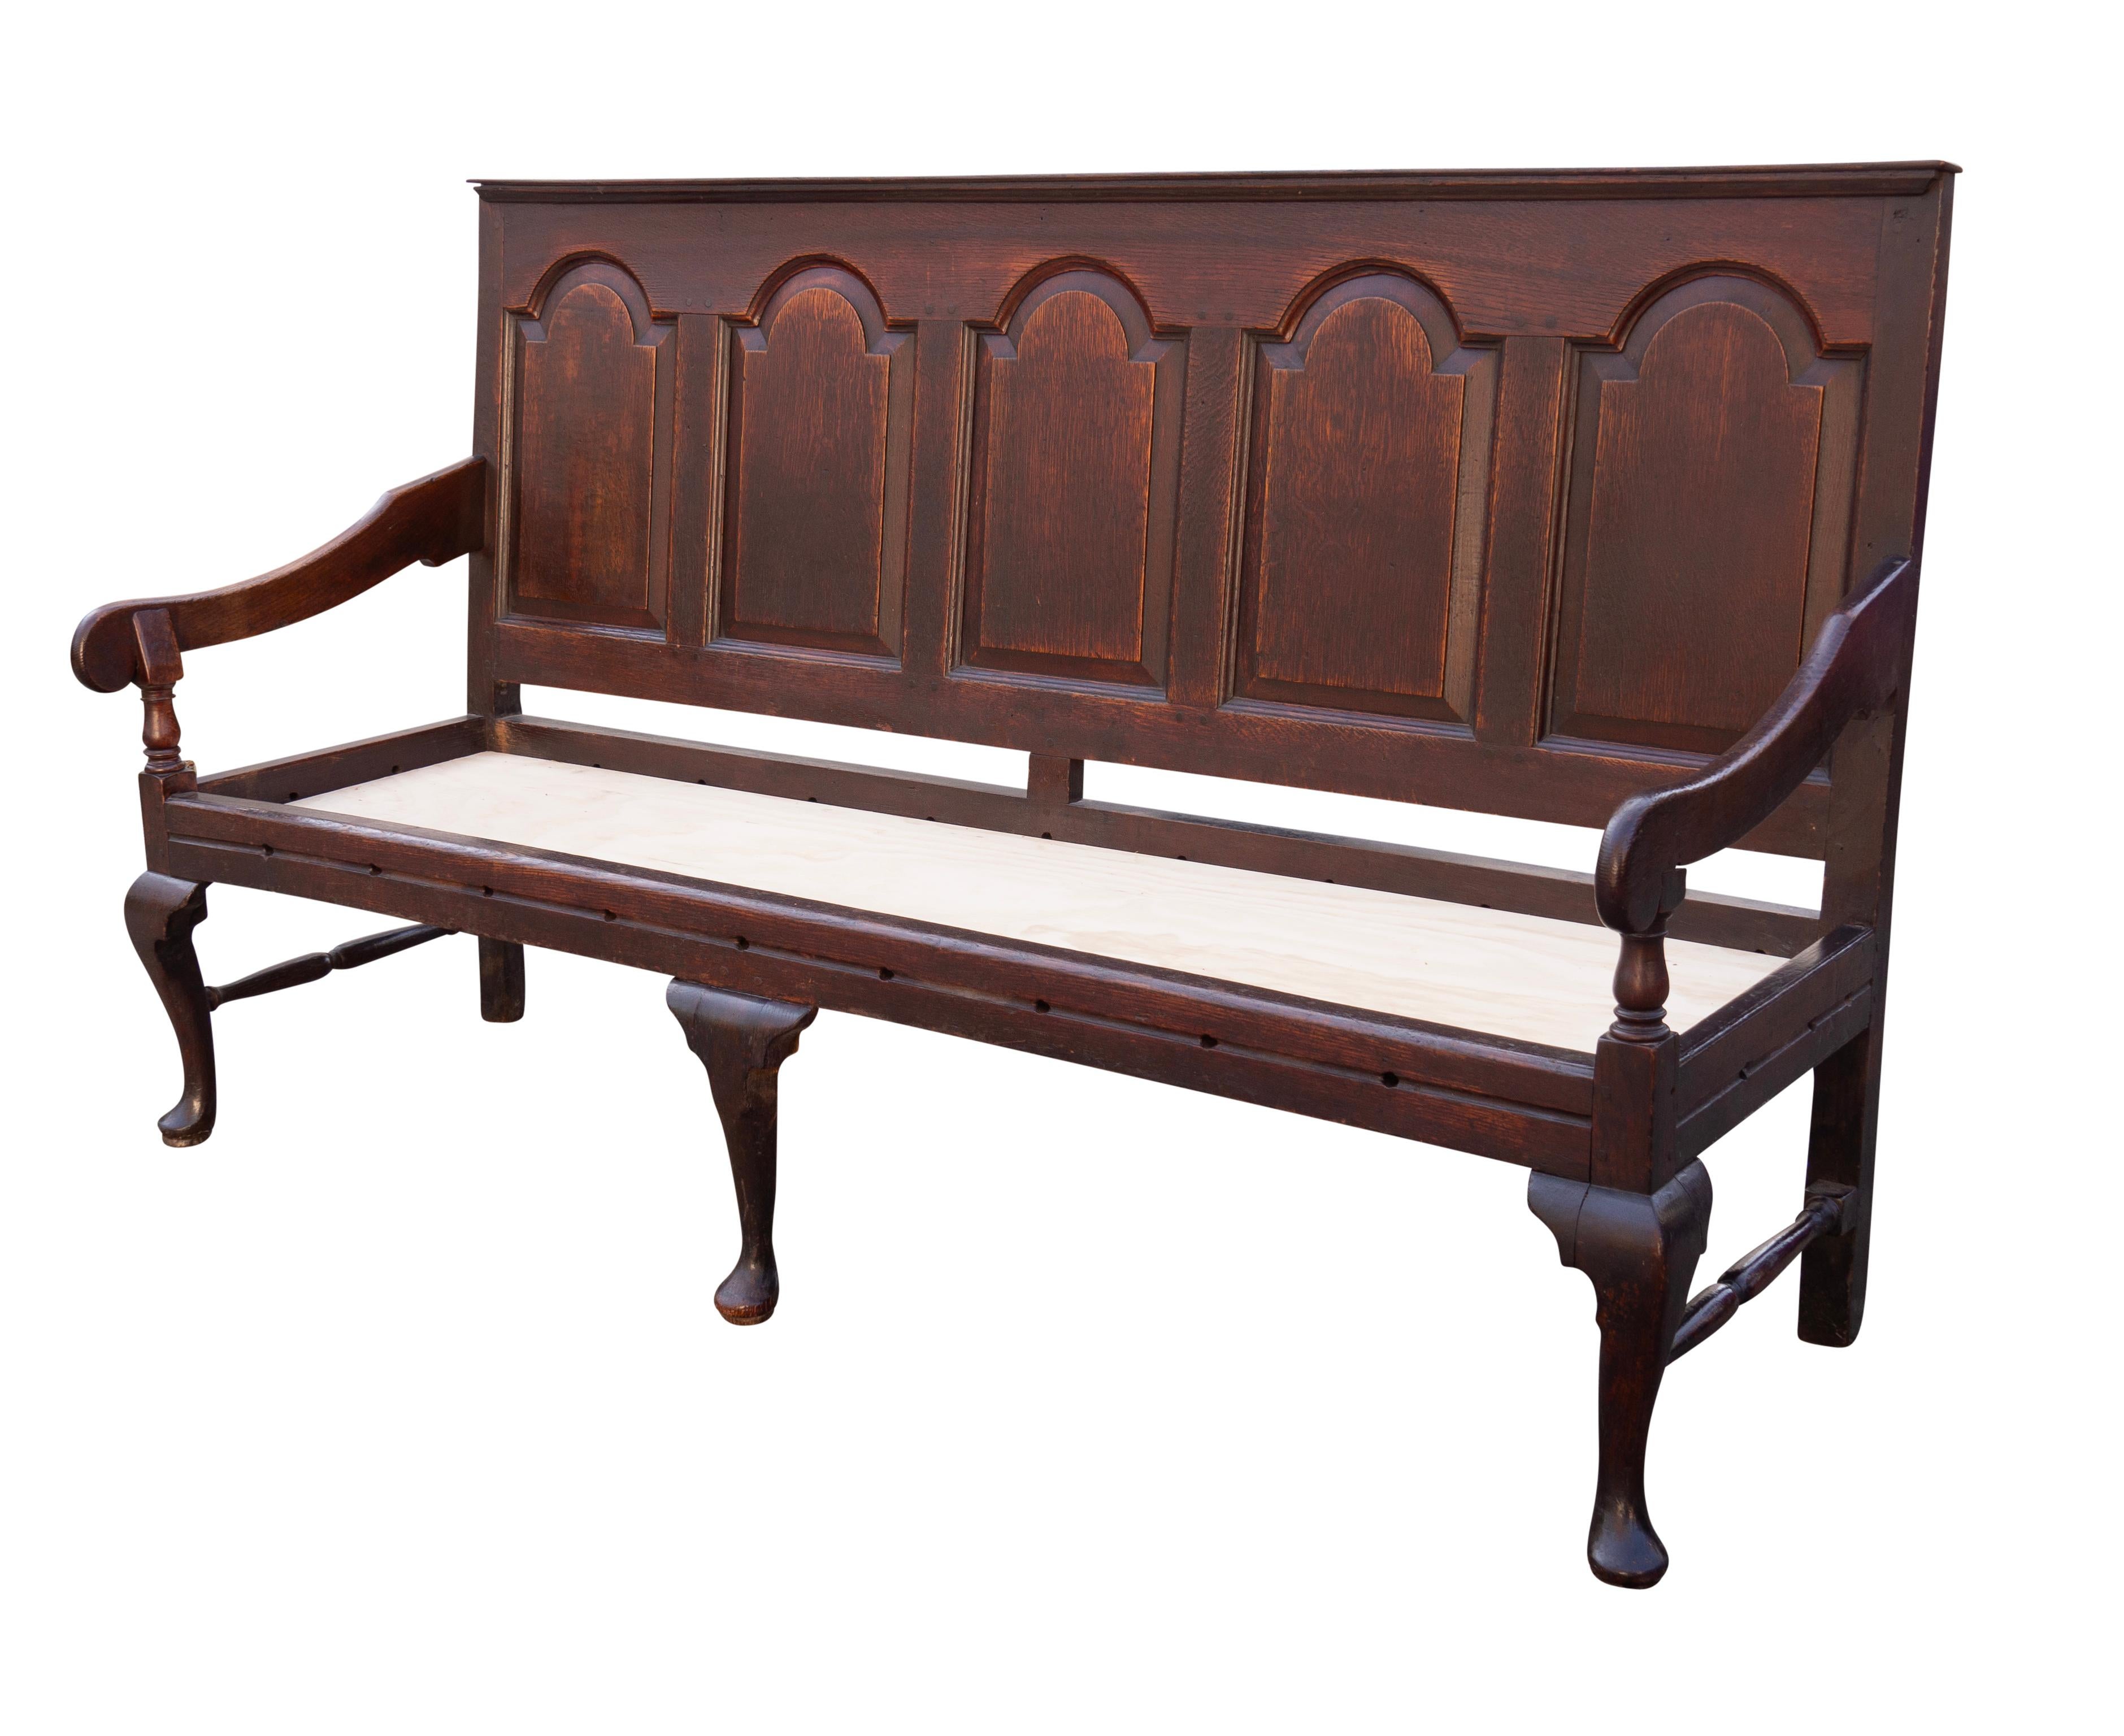 George III Oak Paneled Back Settle Bench In Good Condition For Sale In Essex, MA